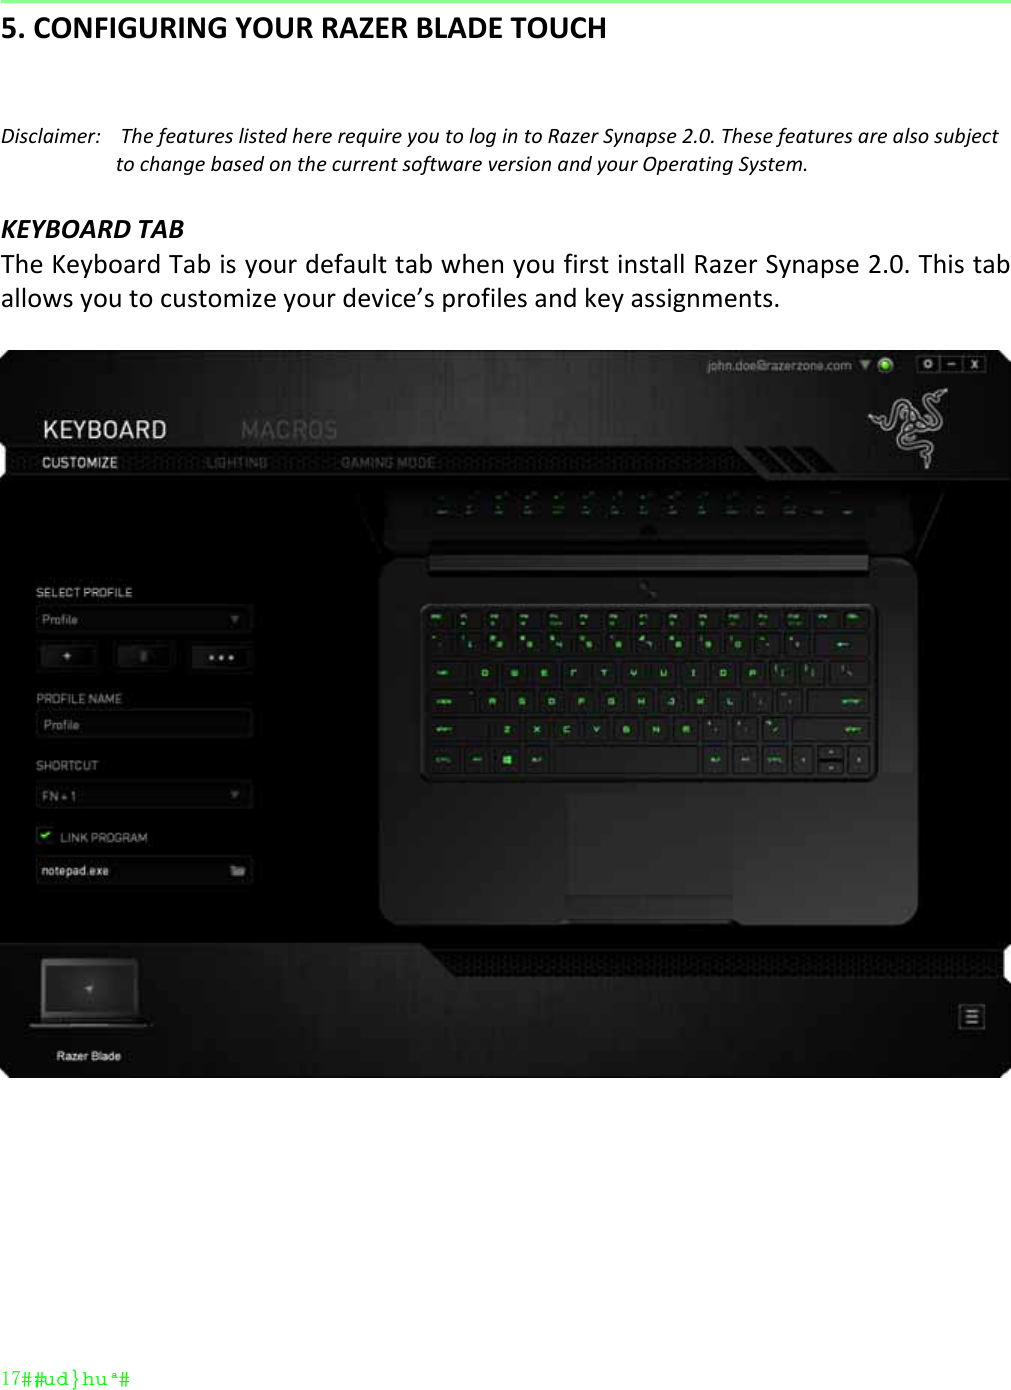  17_UD]HU5.CONFIGURINGYOURRAZERBLADETOUCHDisclaimer:ThefeatureslistedhererequireyoutologintoRazerSynapse2.0.ThesefeaturesarealsosubjecttochangebasedonthecurrentsoftwareversionandyourOperatingSystem.KEYBOARDTABTheKeyboardTabisyourdefaulttabwhenyoufirstinstallRazerSynapse2.0.Thistaballowsyoutocustomizeyourdevice’sprofilesandkeyassignments.